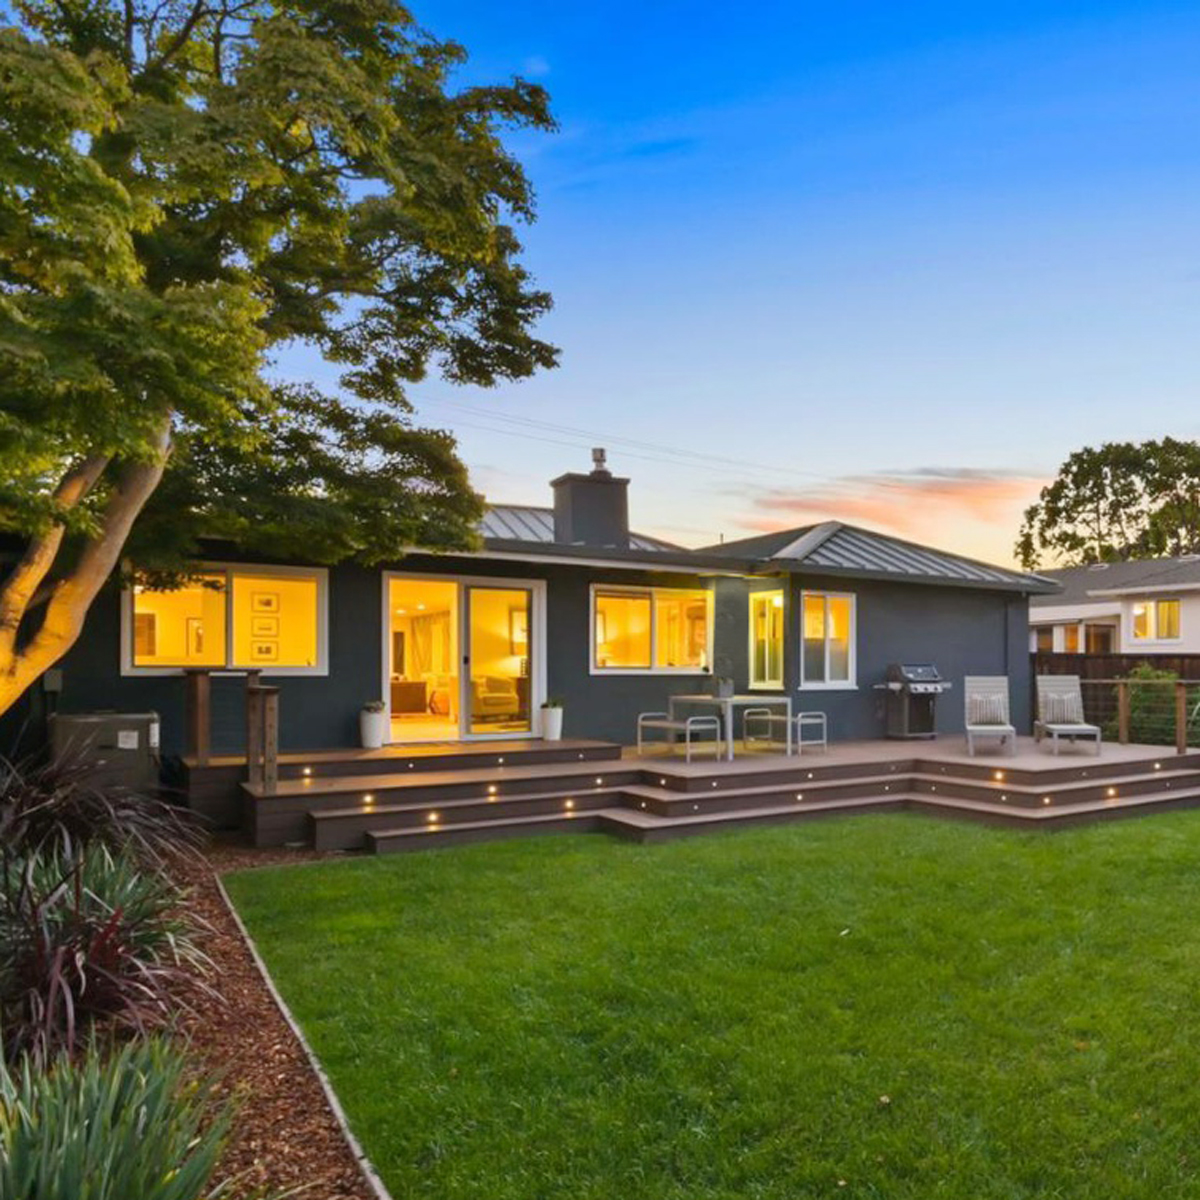 Night image of exterior of bay area home with backyard